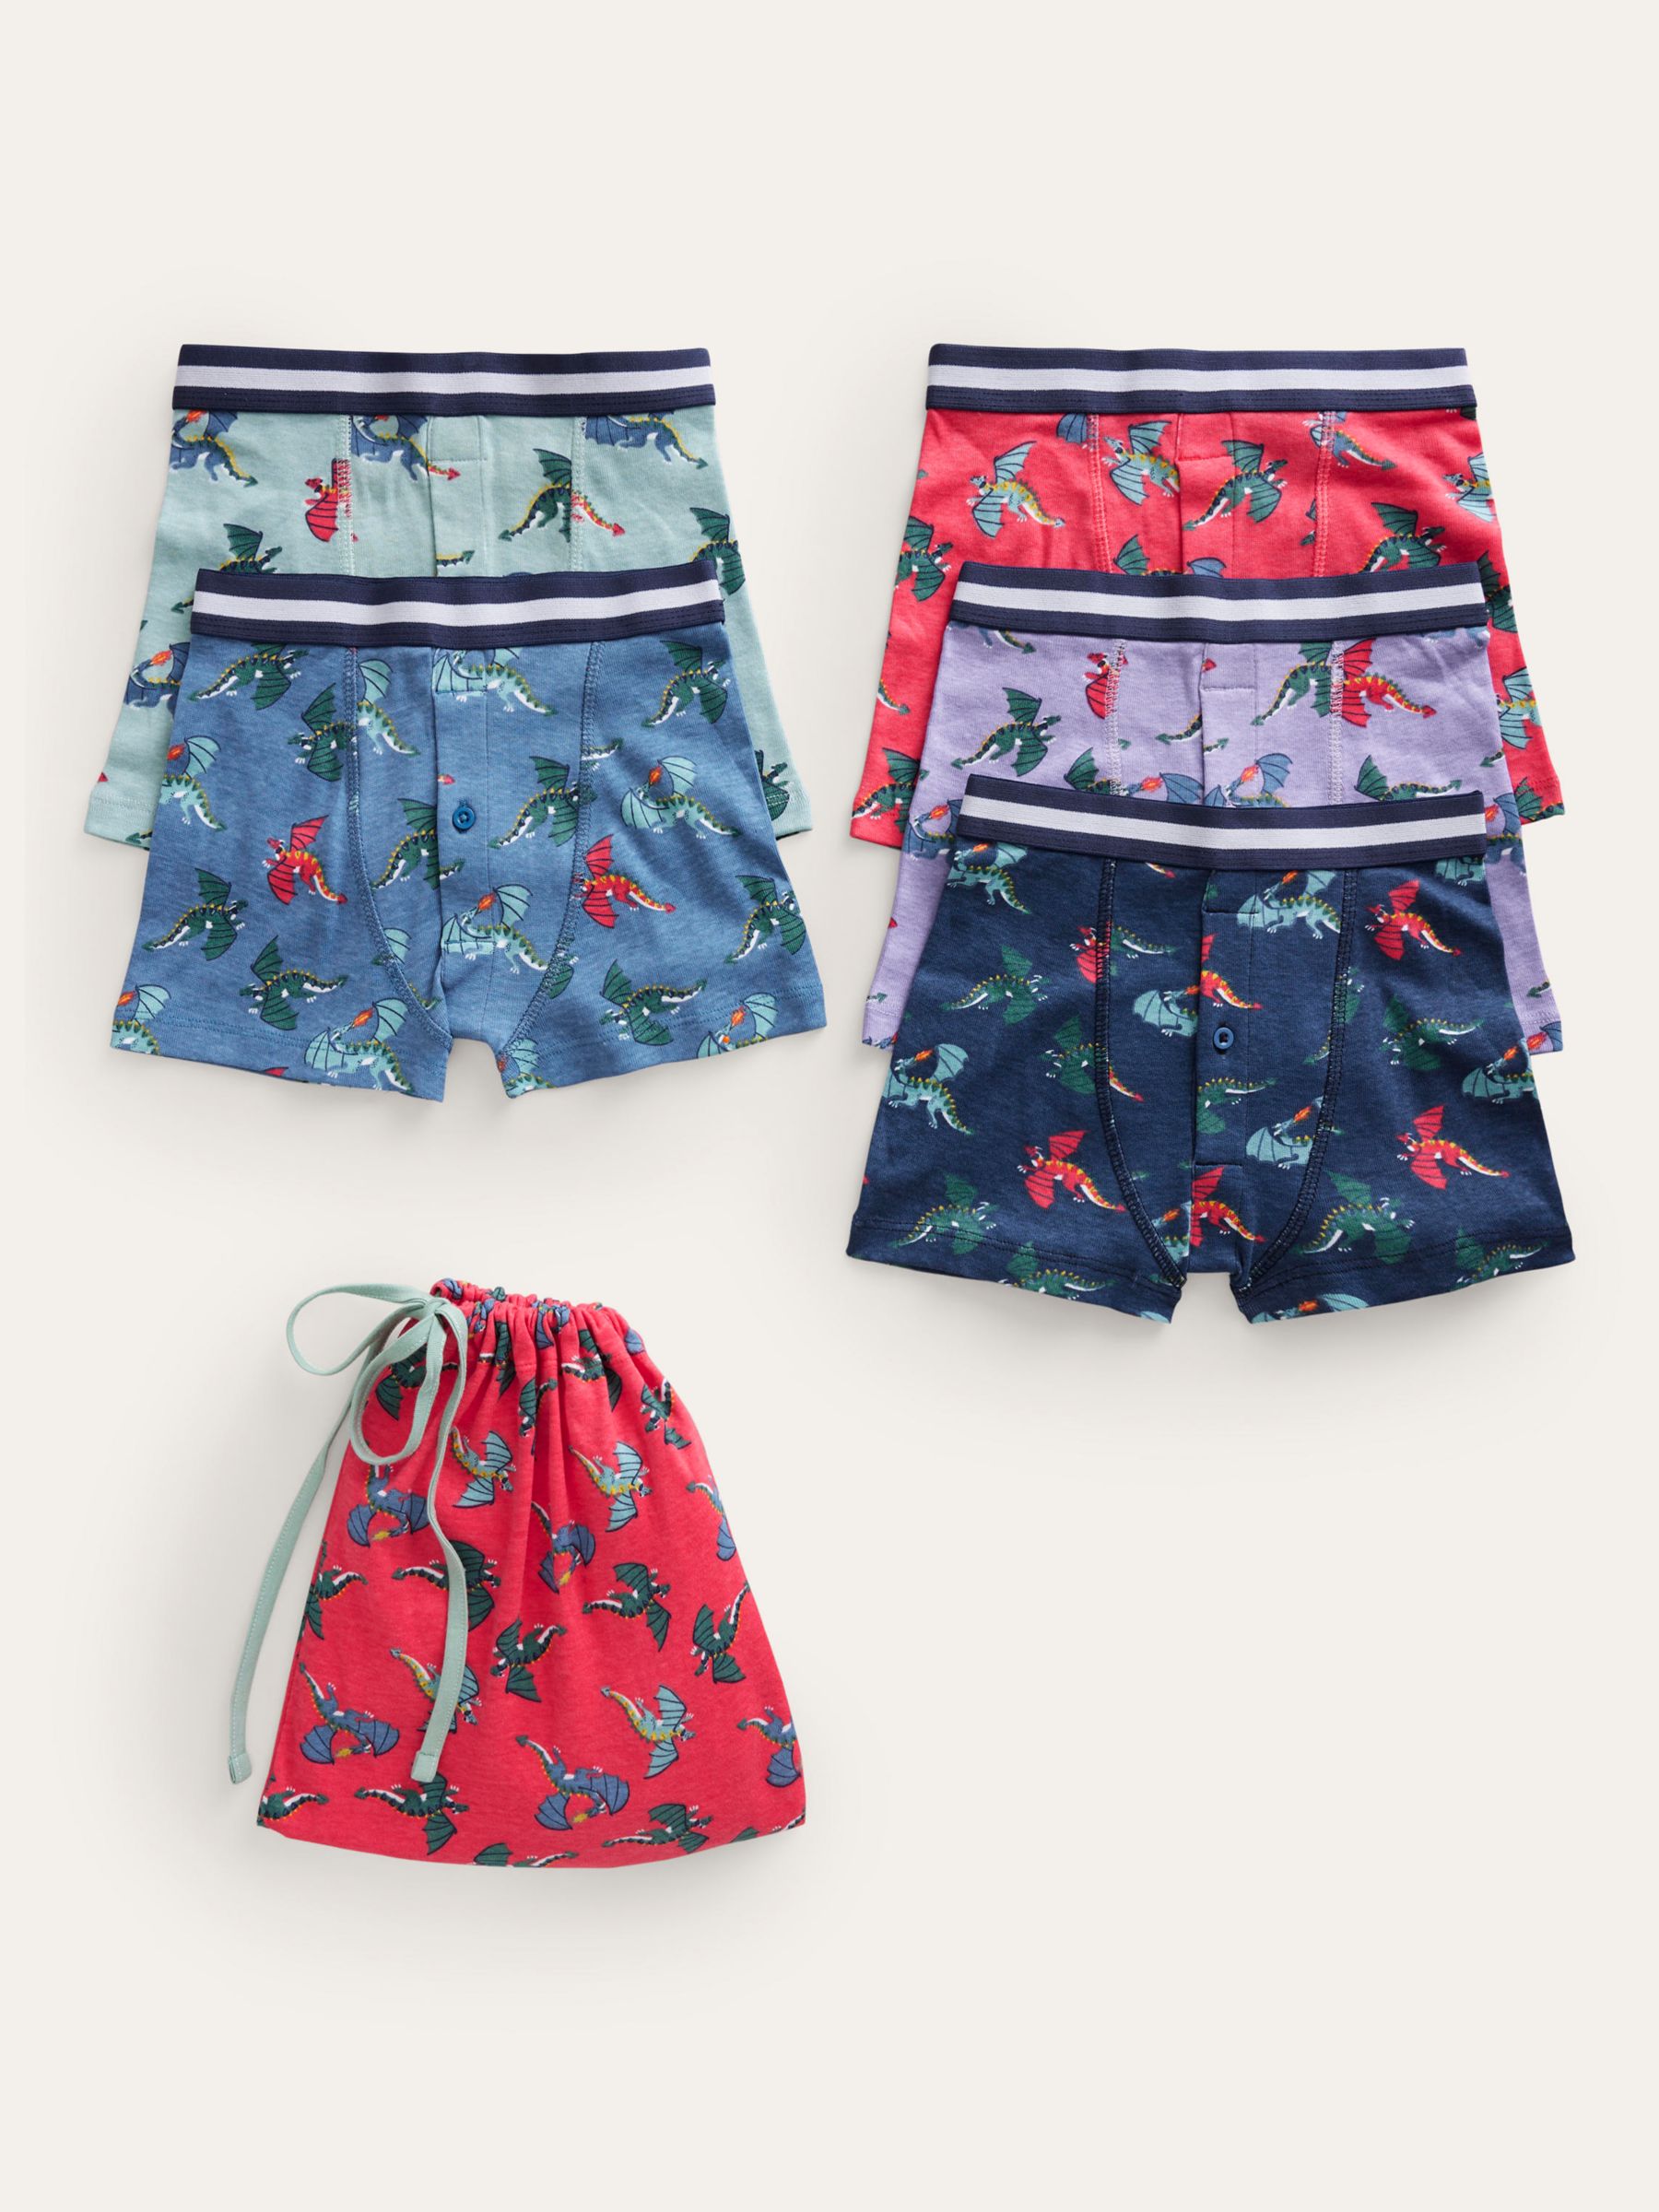 Mini Boden Kids' Dragons Print Boxers, Pack Of 5, Multi, 2-3 years